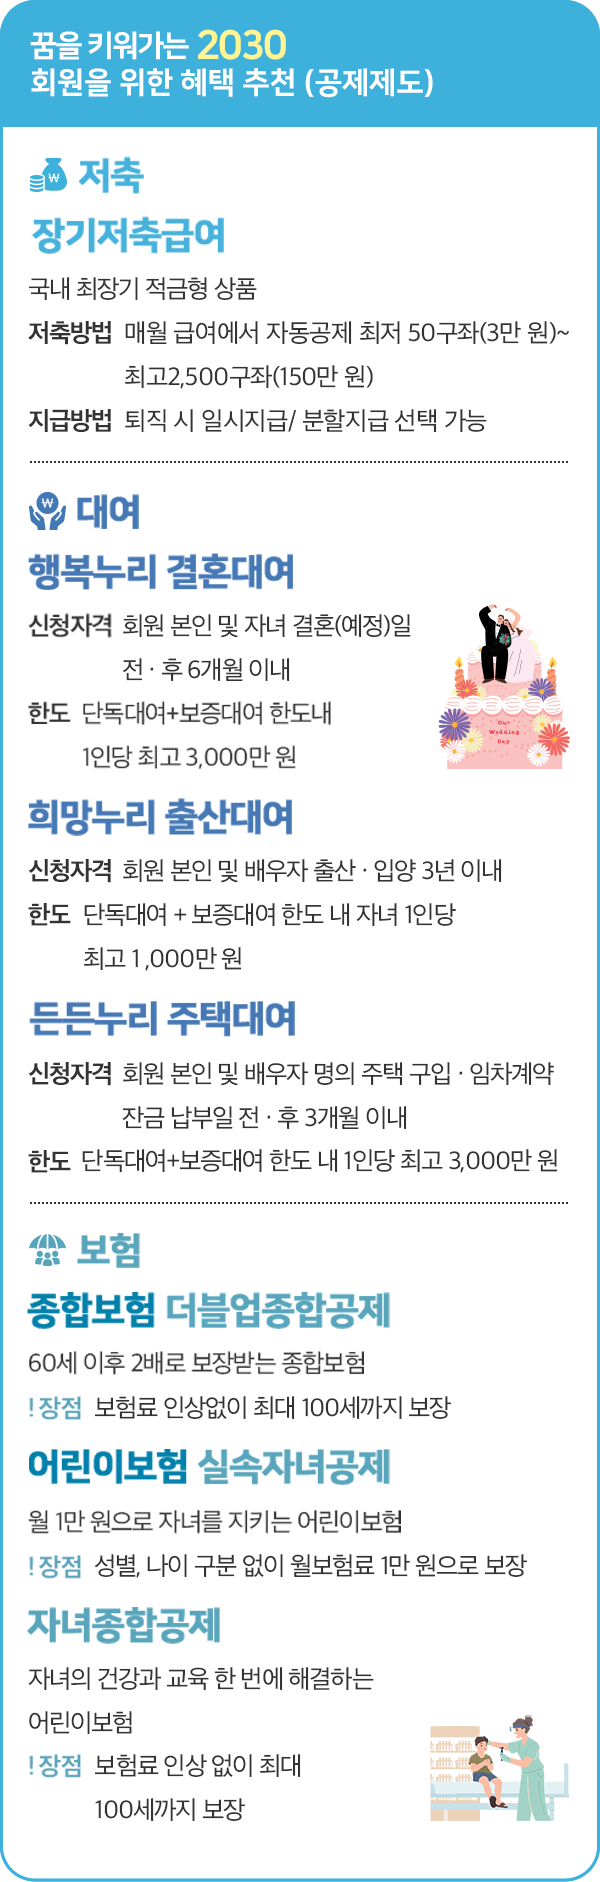 The-K 포커스 2_02